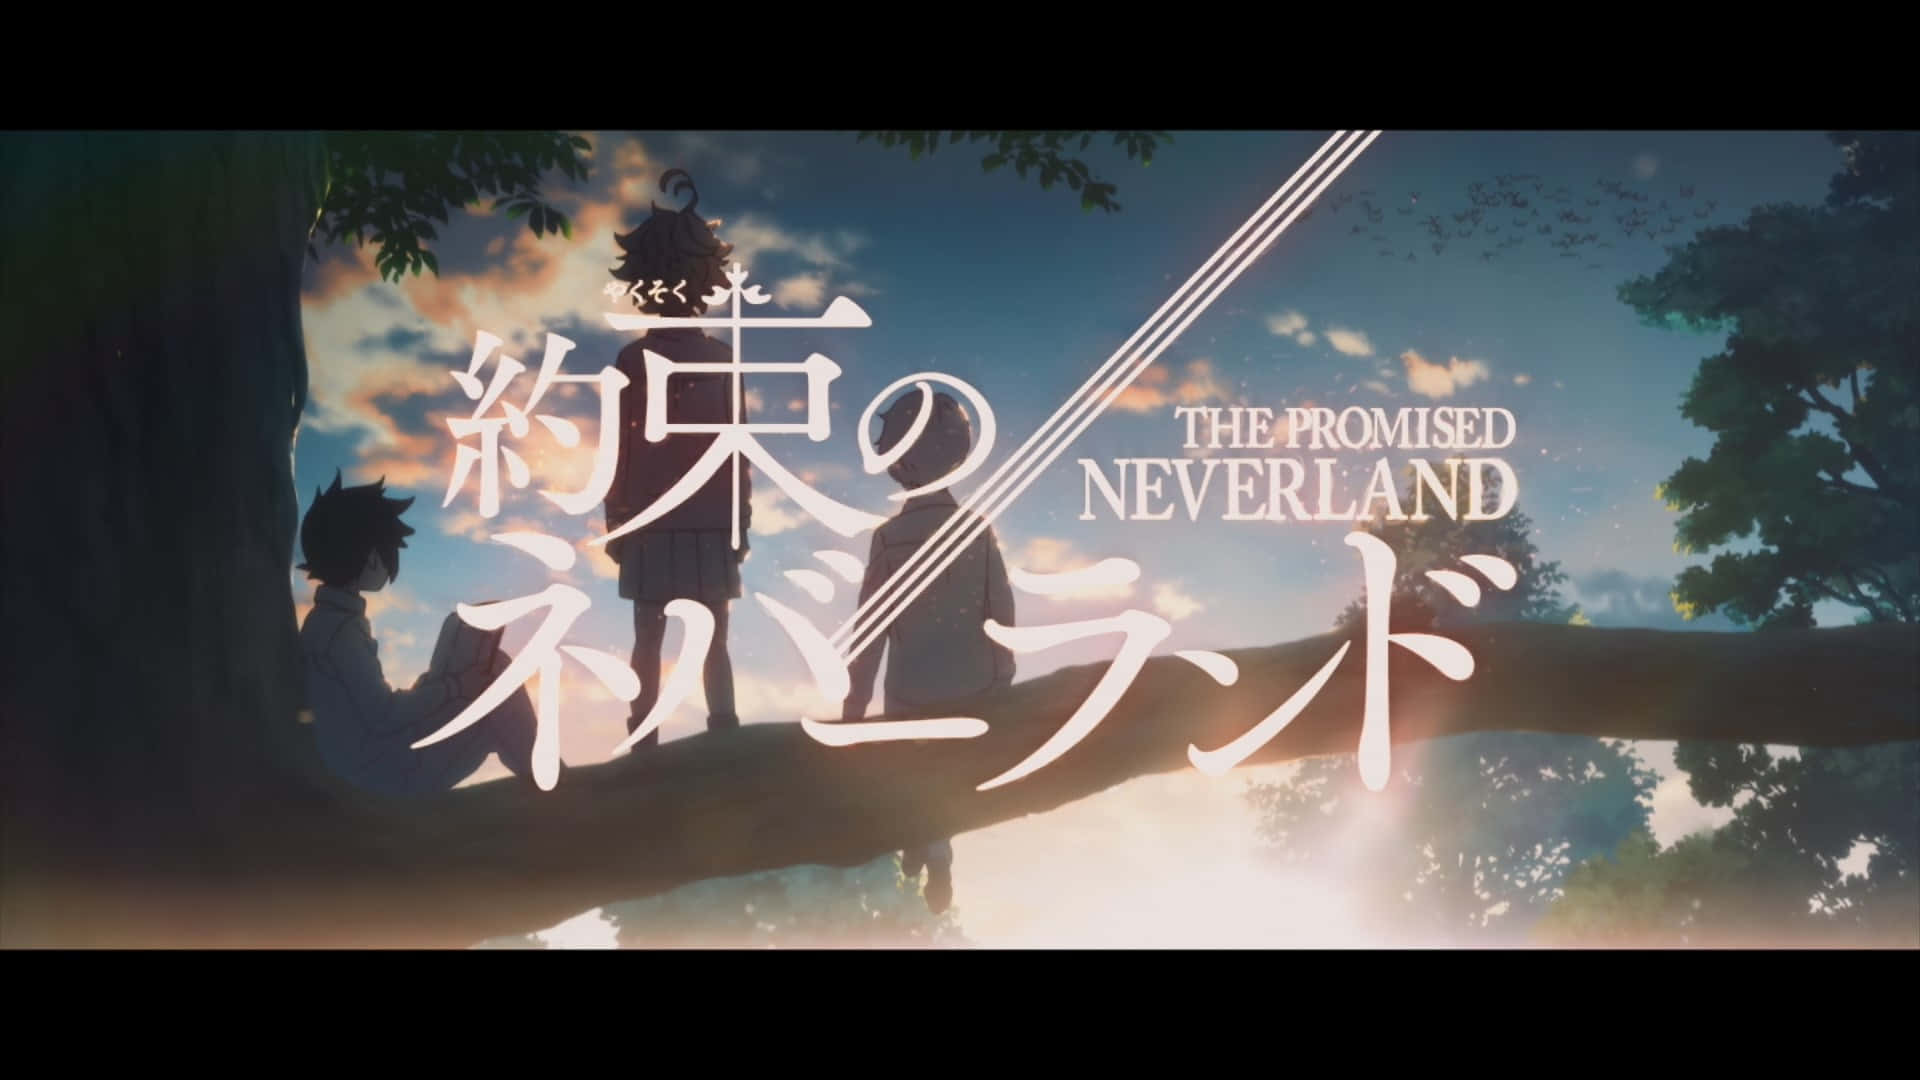 L'immaginedel Film The Promised Neverland